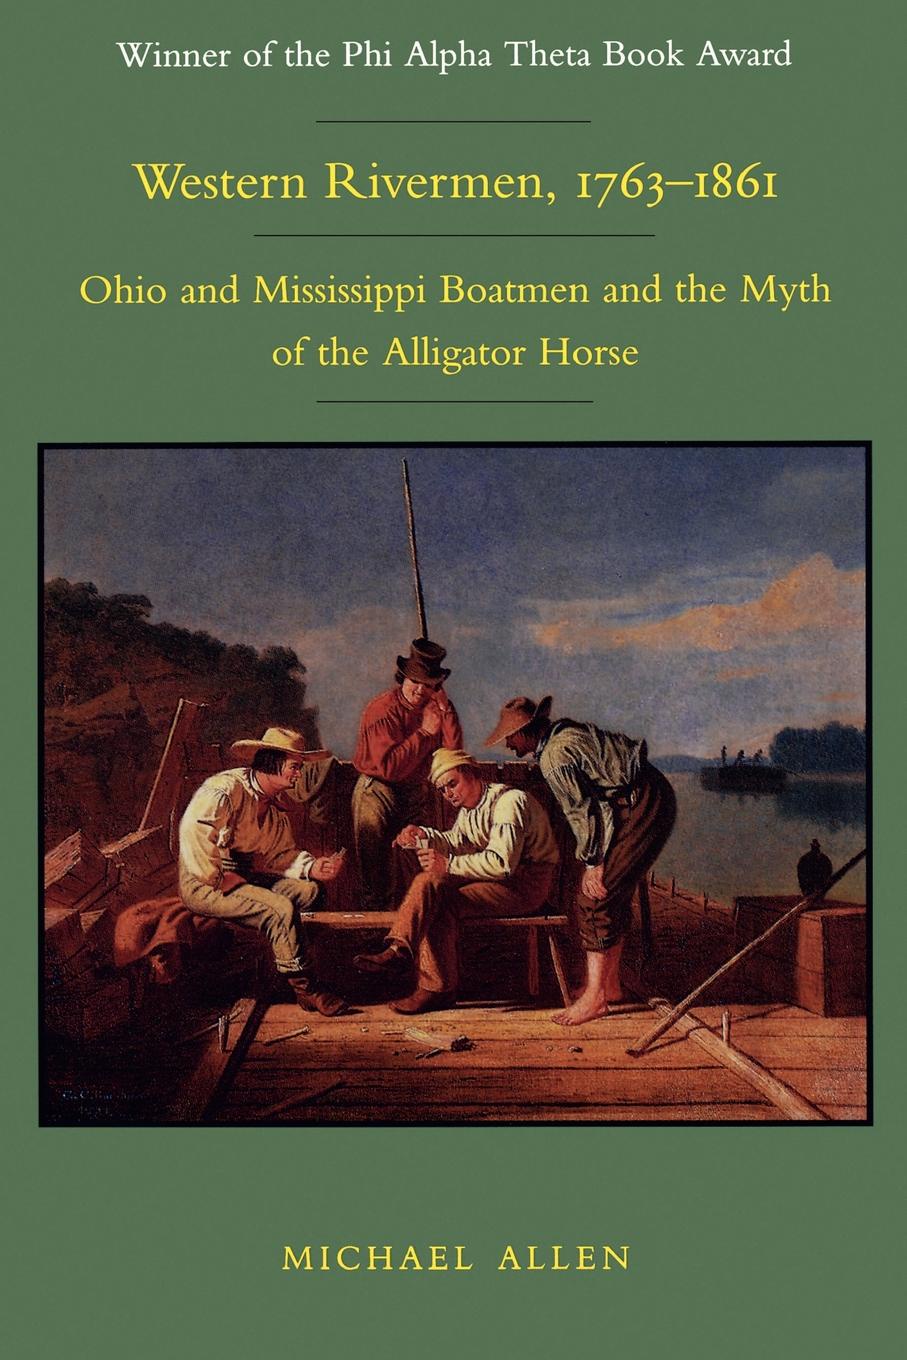 Western Rivermen, 1763-1861. Ohio and Mississippi Boatmen and the Myth of the Alligator Horse